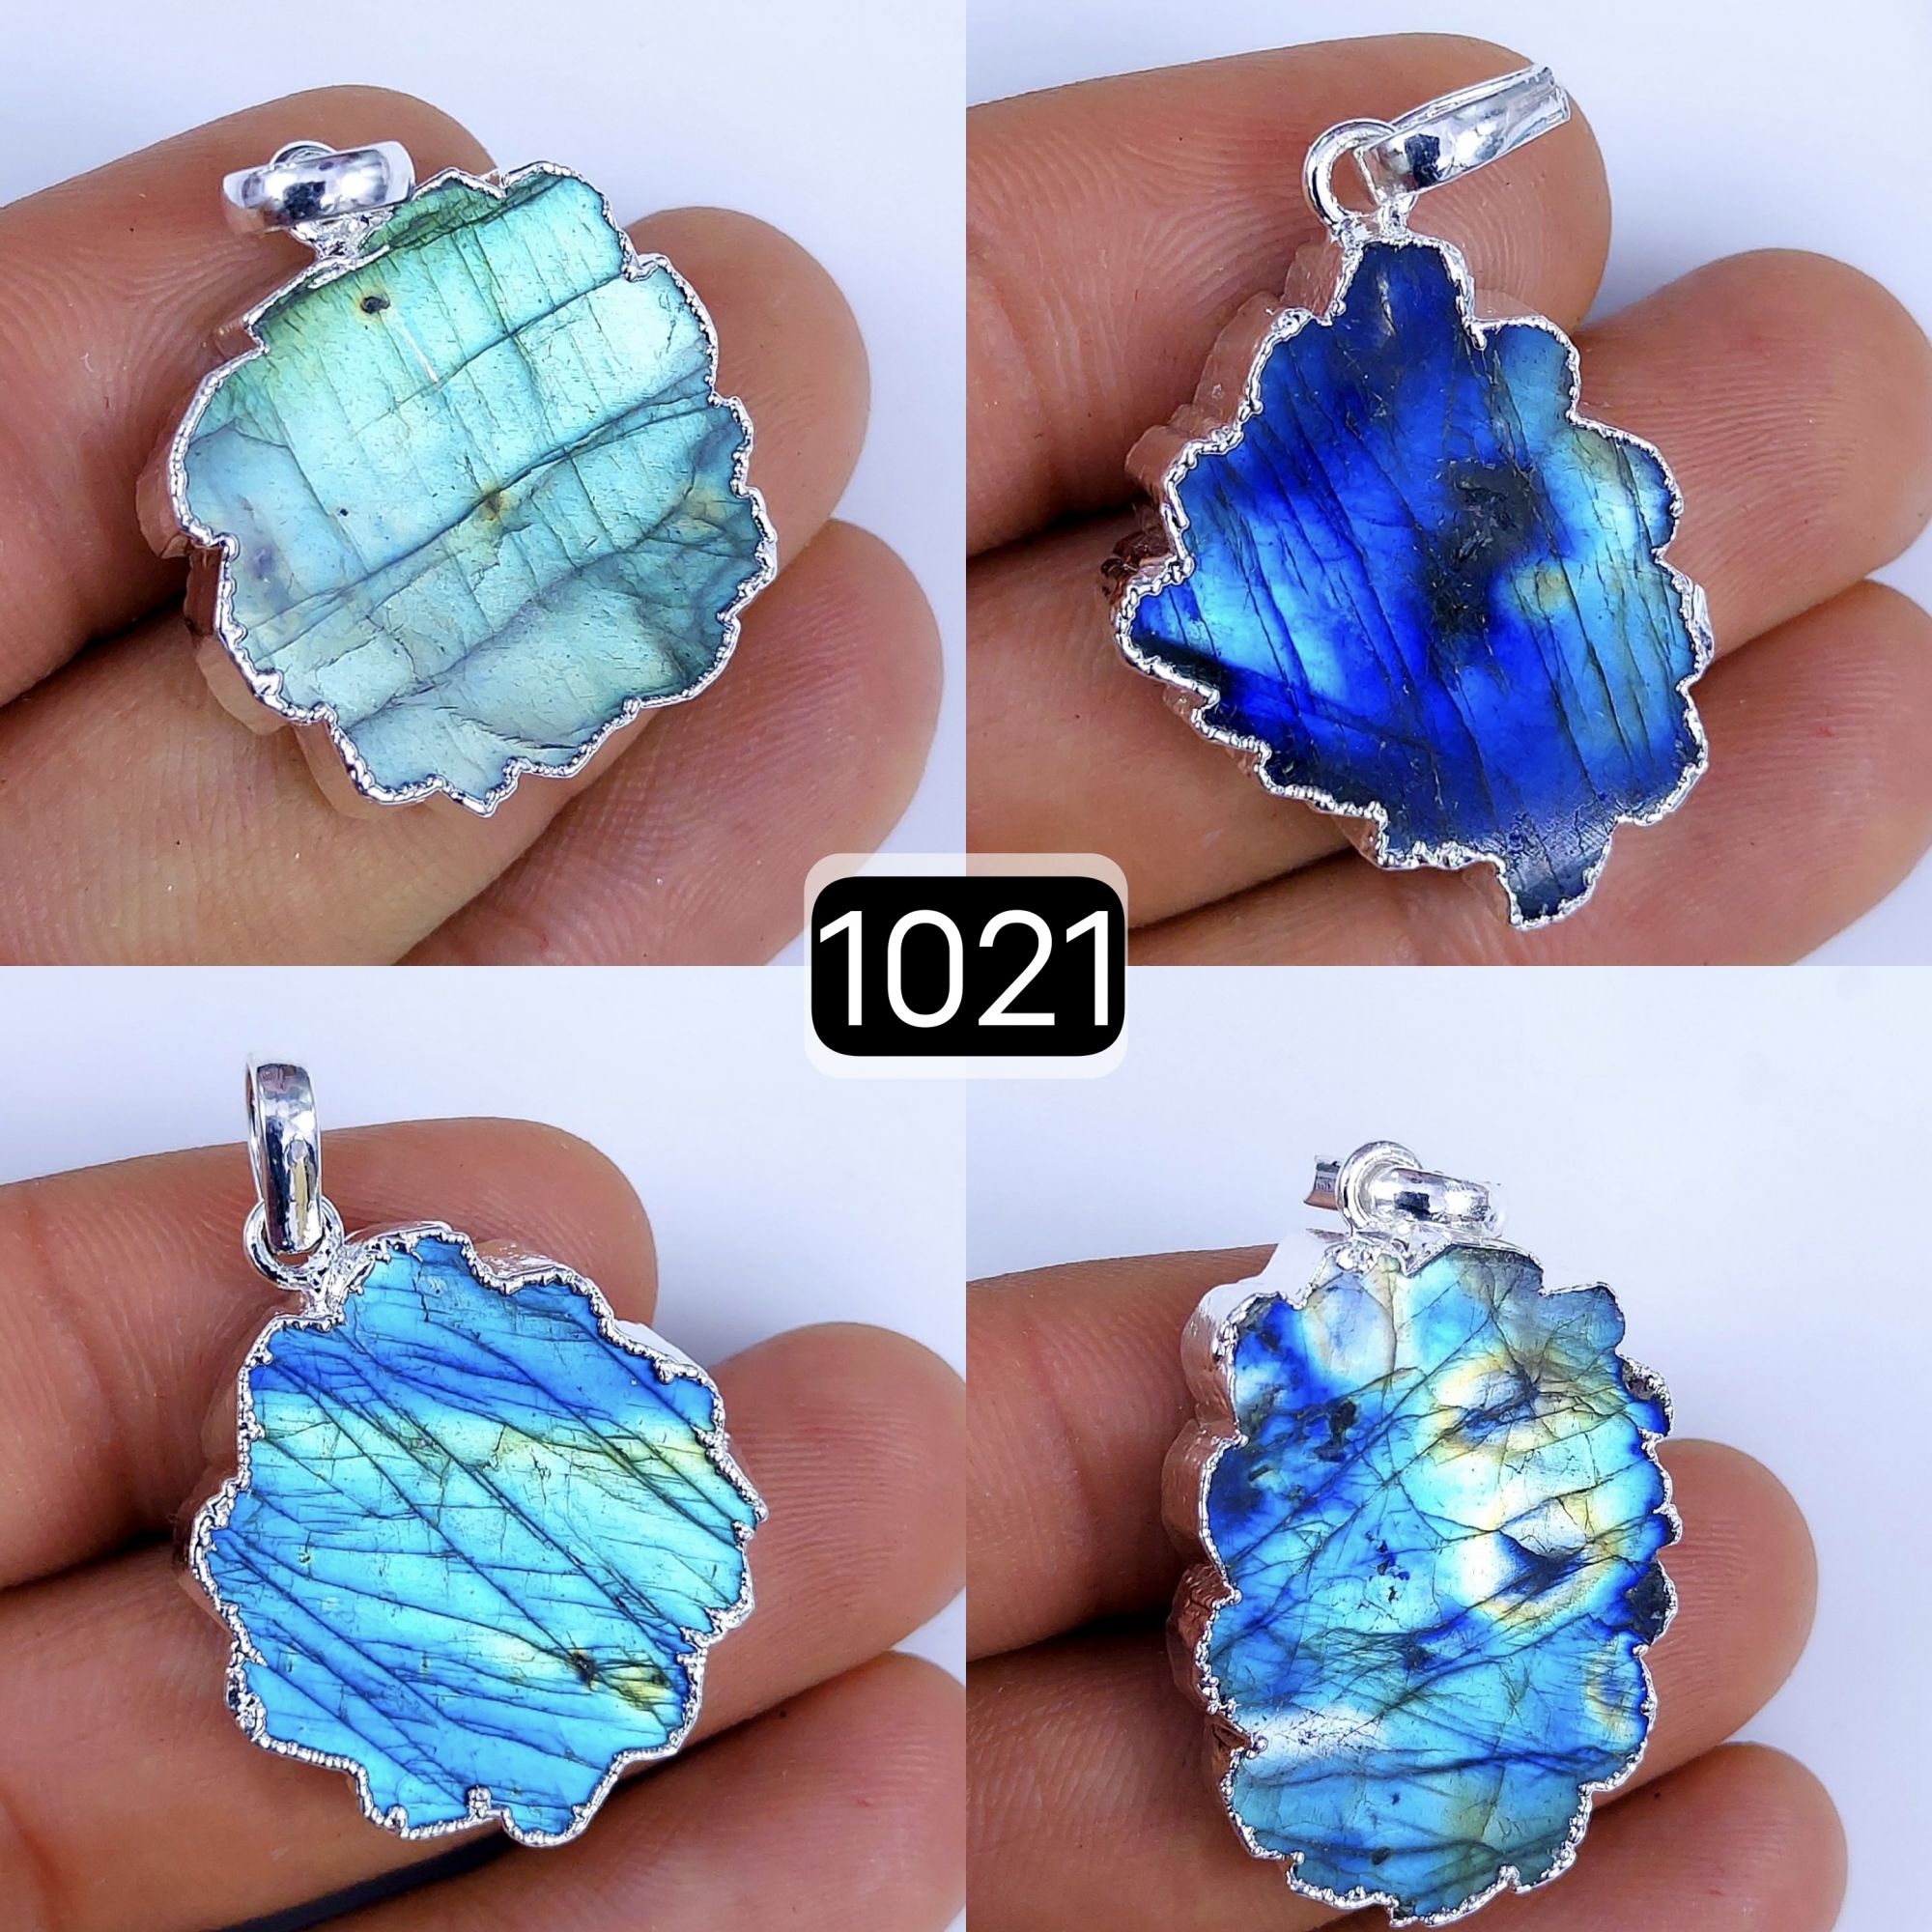 147Cts Natural Blue Labradorite Silver Electroplated Slice Pendant 32x18 22x12mm#1021